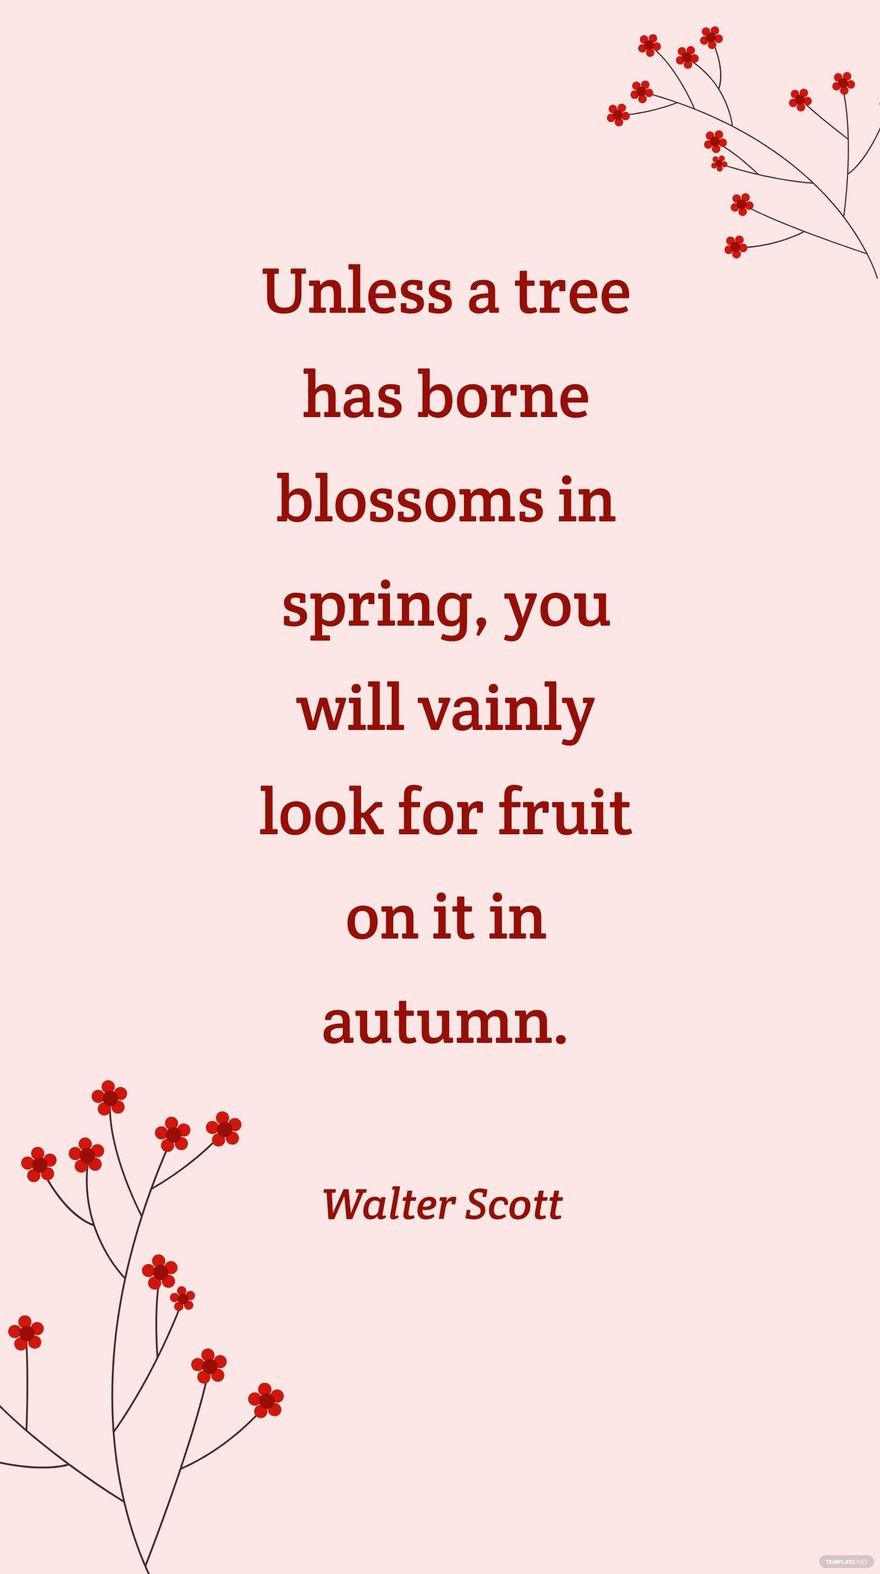  Walter Scott - Unless a tree has borne blossoms in spring, you will vainly look for fruit on it in autumn.